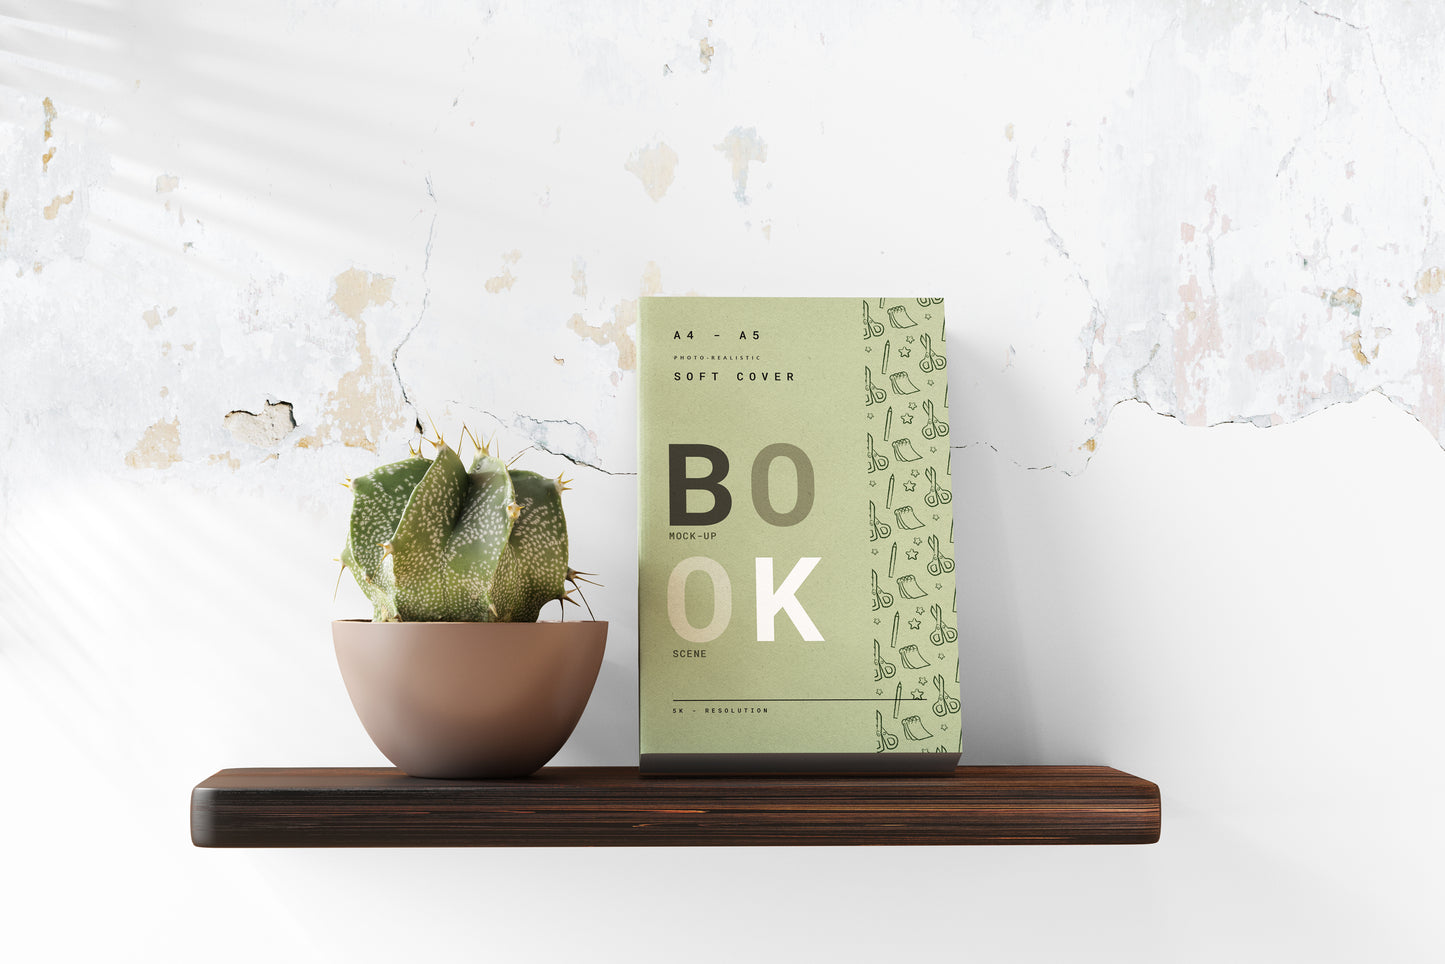 Softcover Large Book Mockups